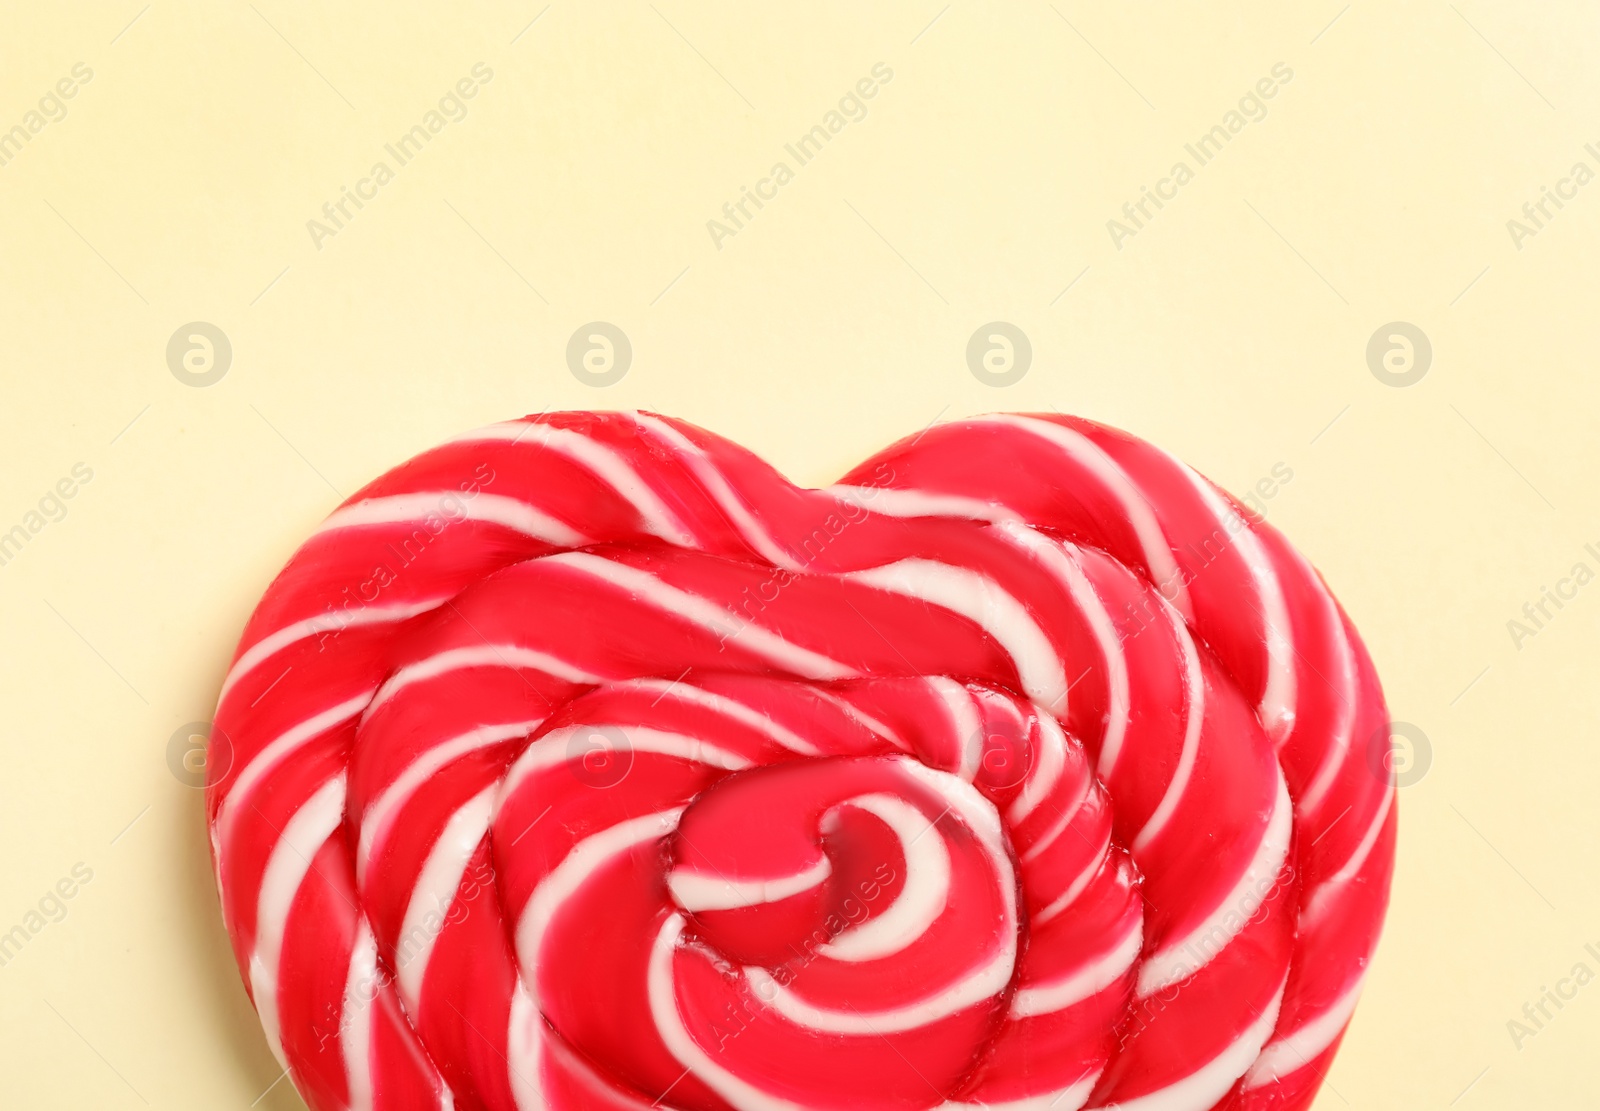 Photo of Sweet heart shaped lollipop on beige background, top view. Valentine's day celebration